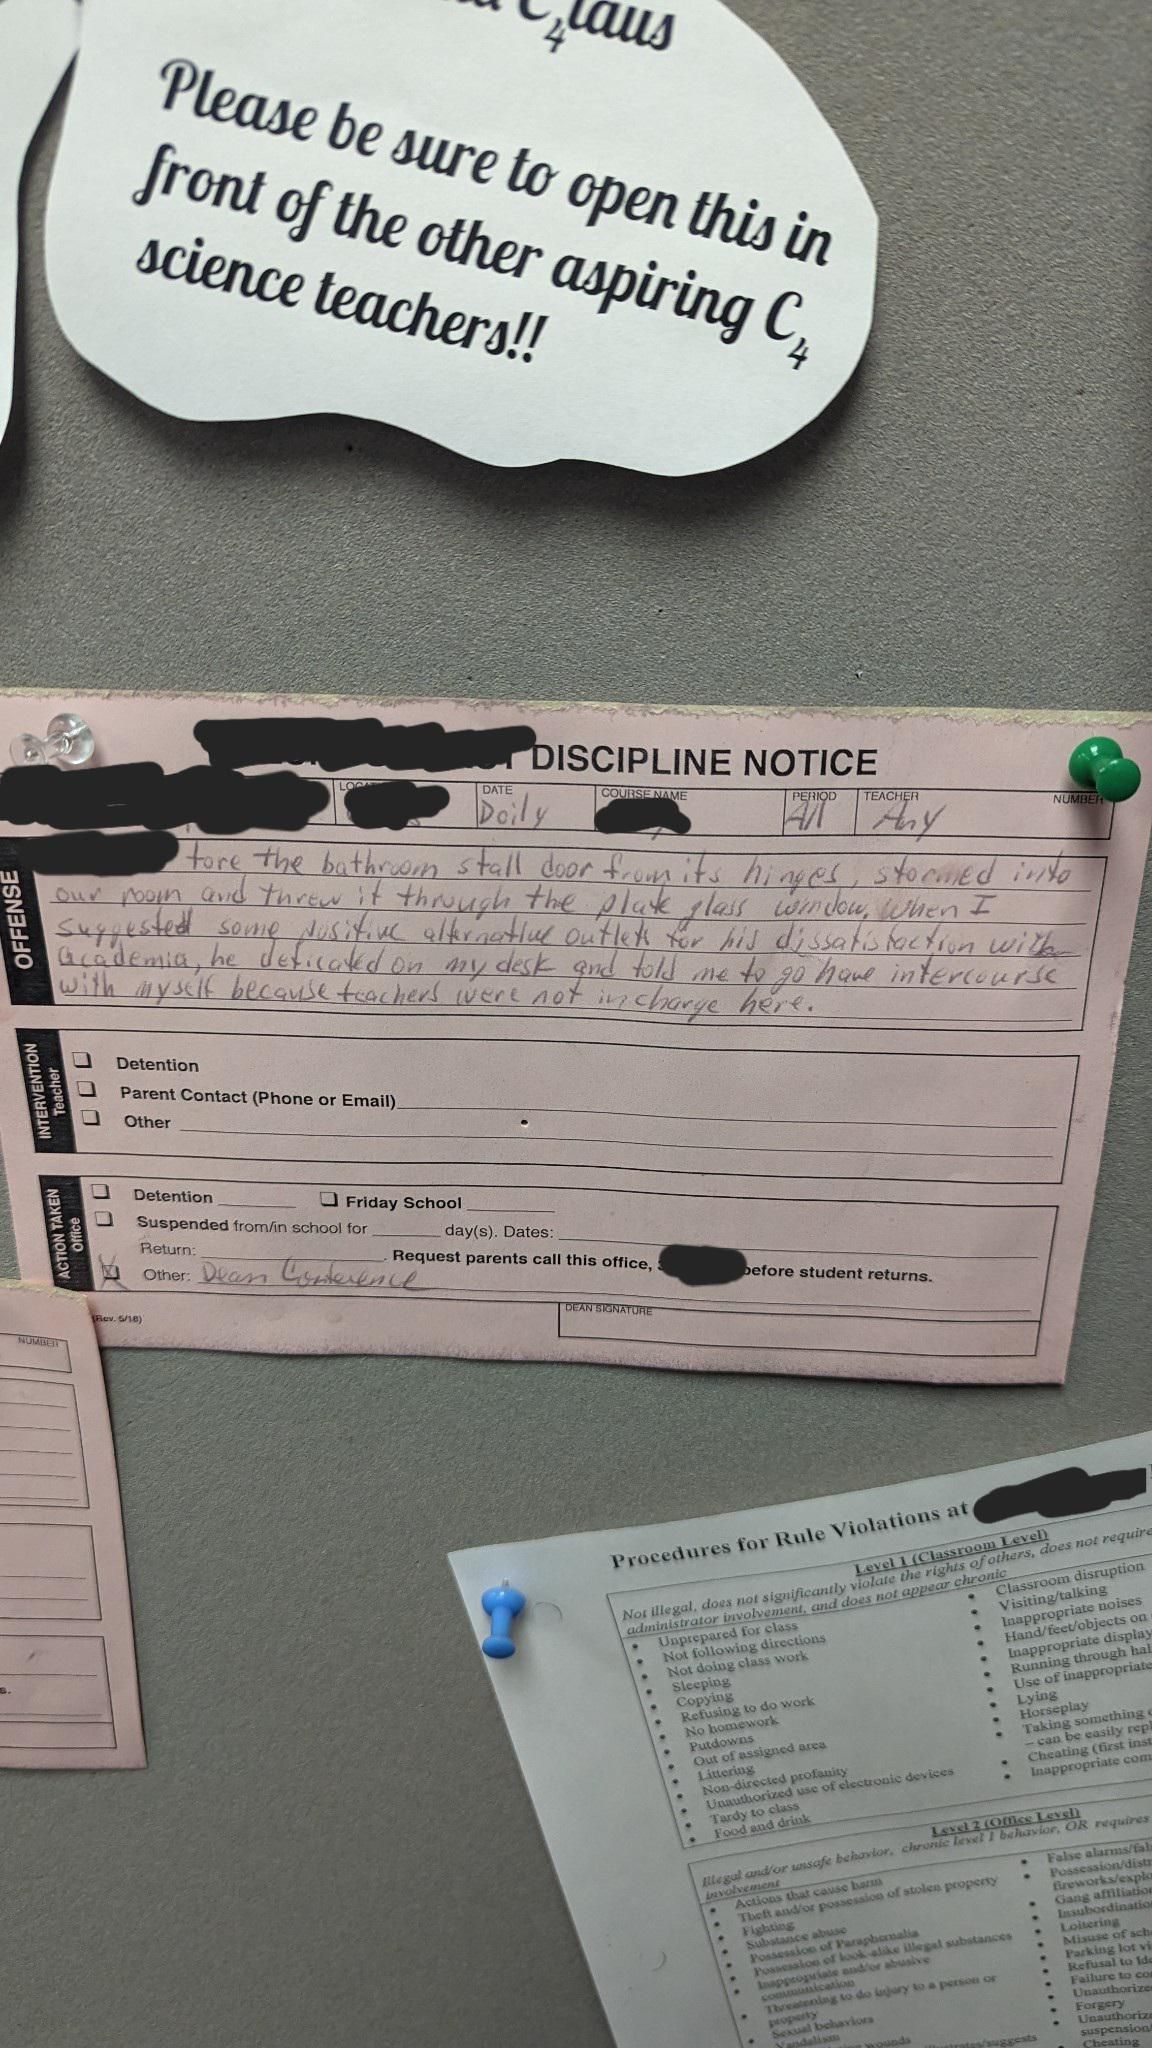 My dad works in schools and he found this discipline notice